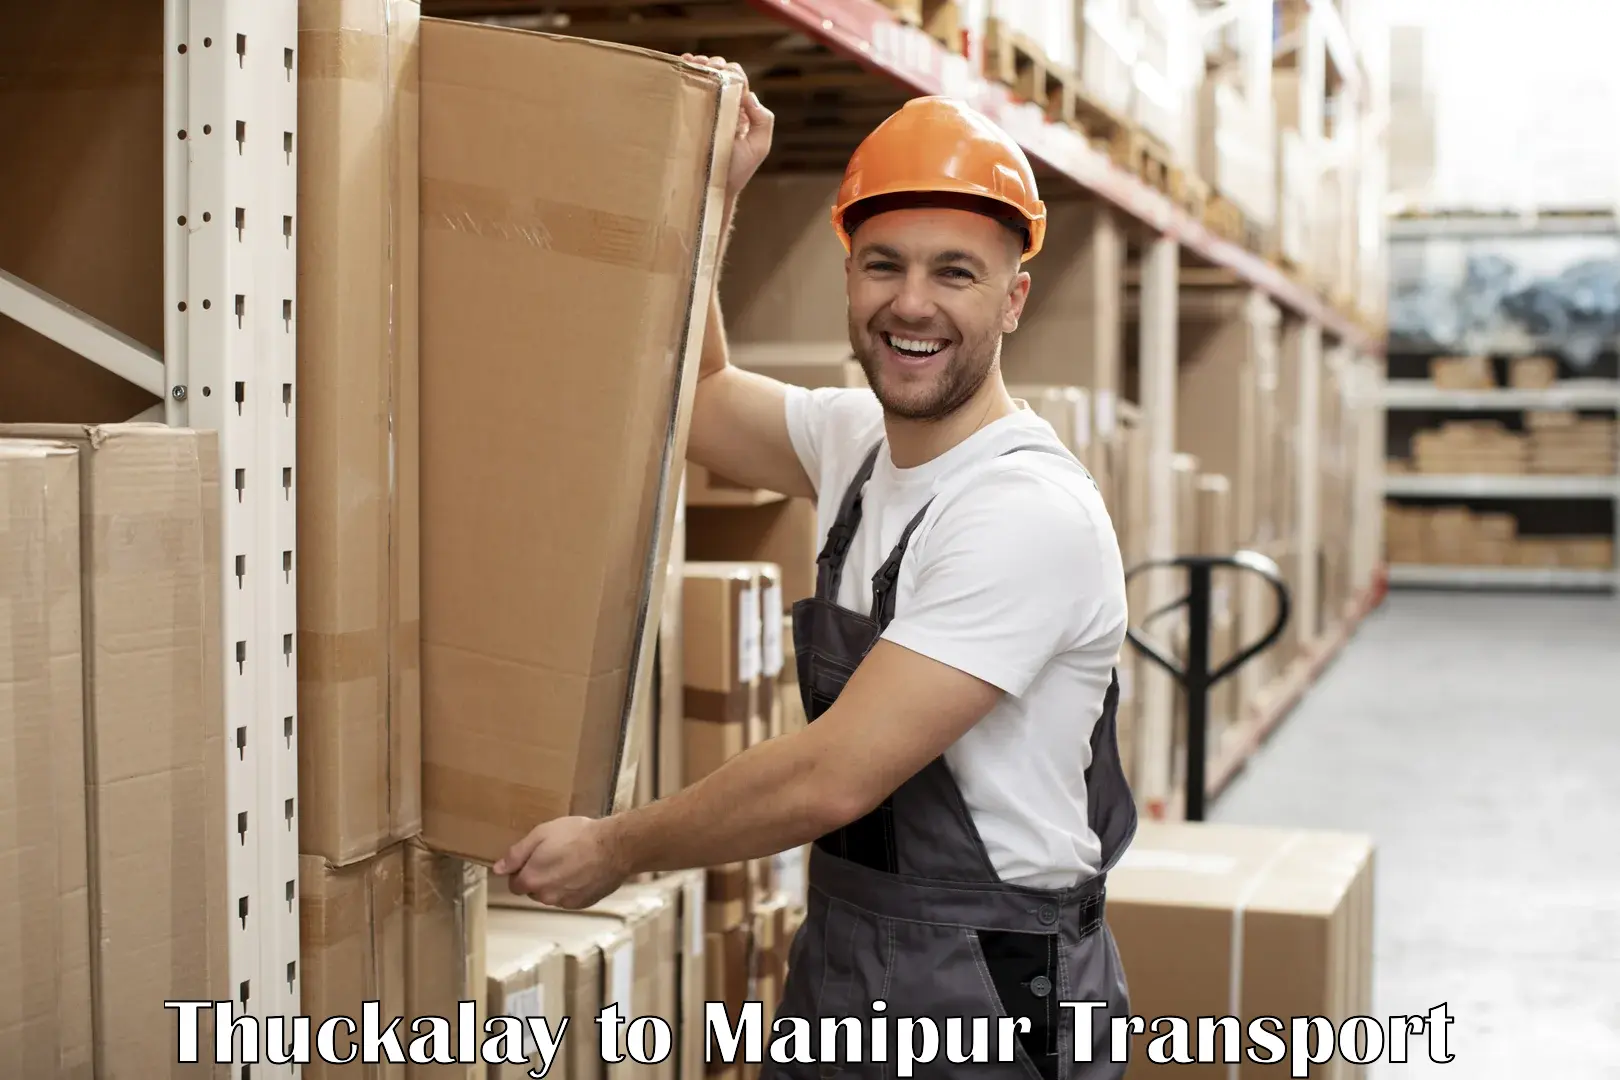 Online transport booking Thuckalay to Manipur